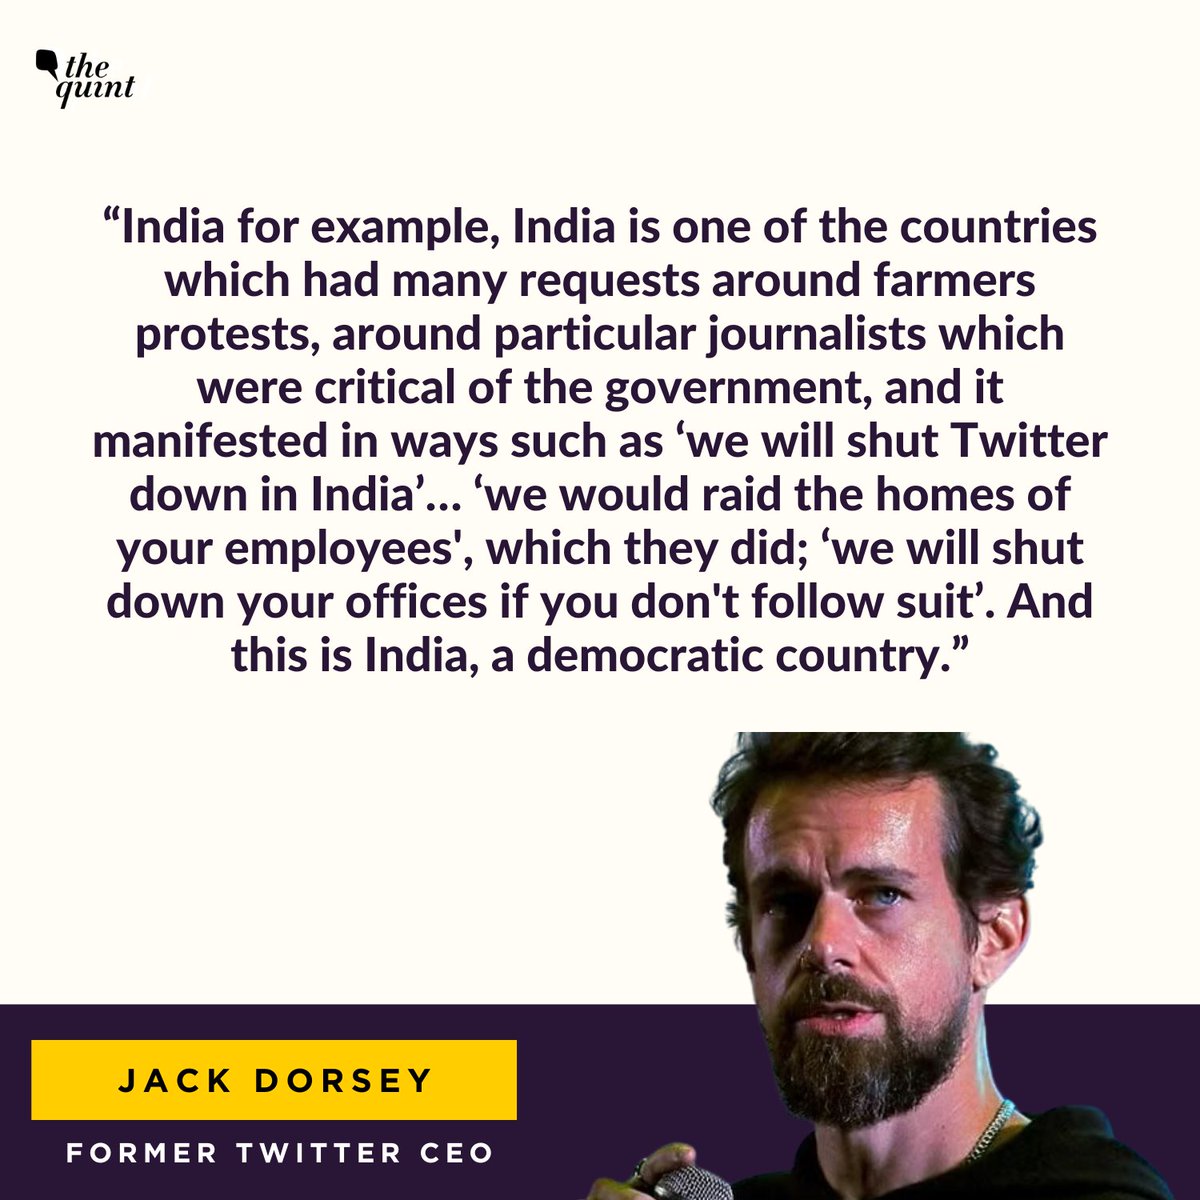 2 years after the #farmersprotest, #JackDorsey alleged in an interview that the micro-blogging site received “many requests” from the Indian govt during the farmers’ protests, especially around “journalists that were critical of the govt.”

Read more: t.ly/Erh0